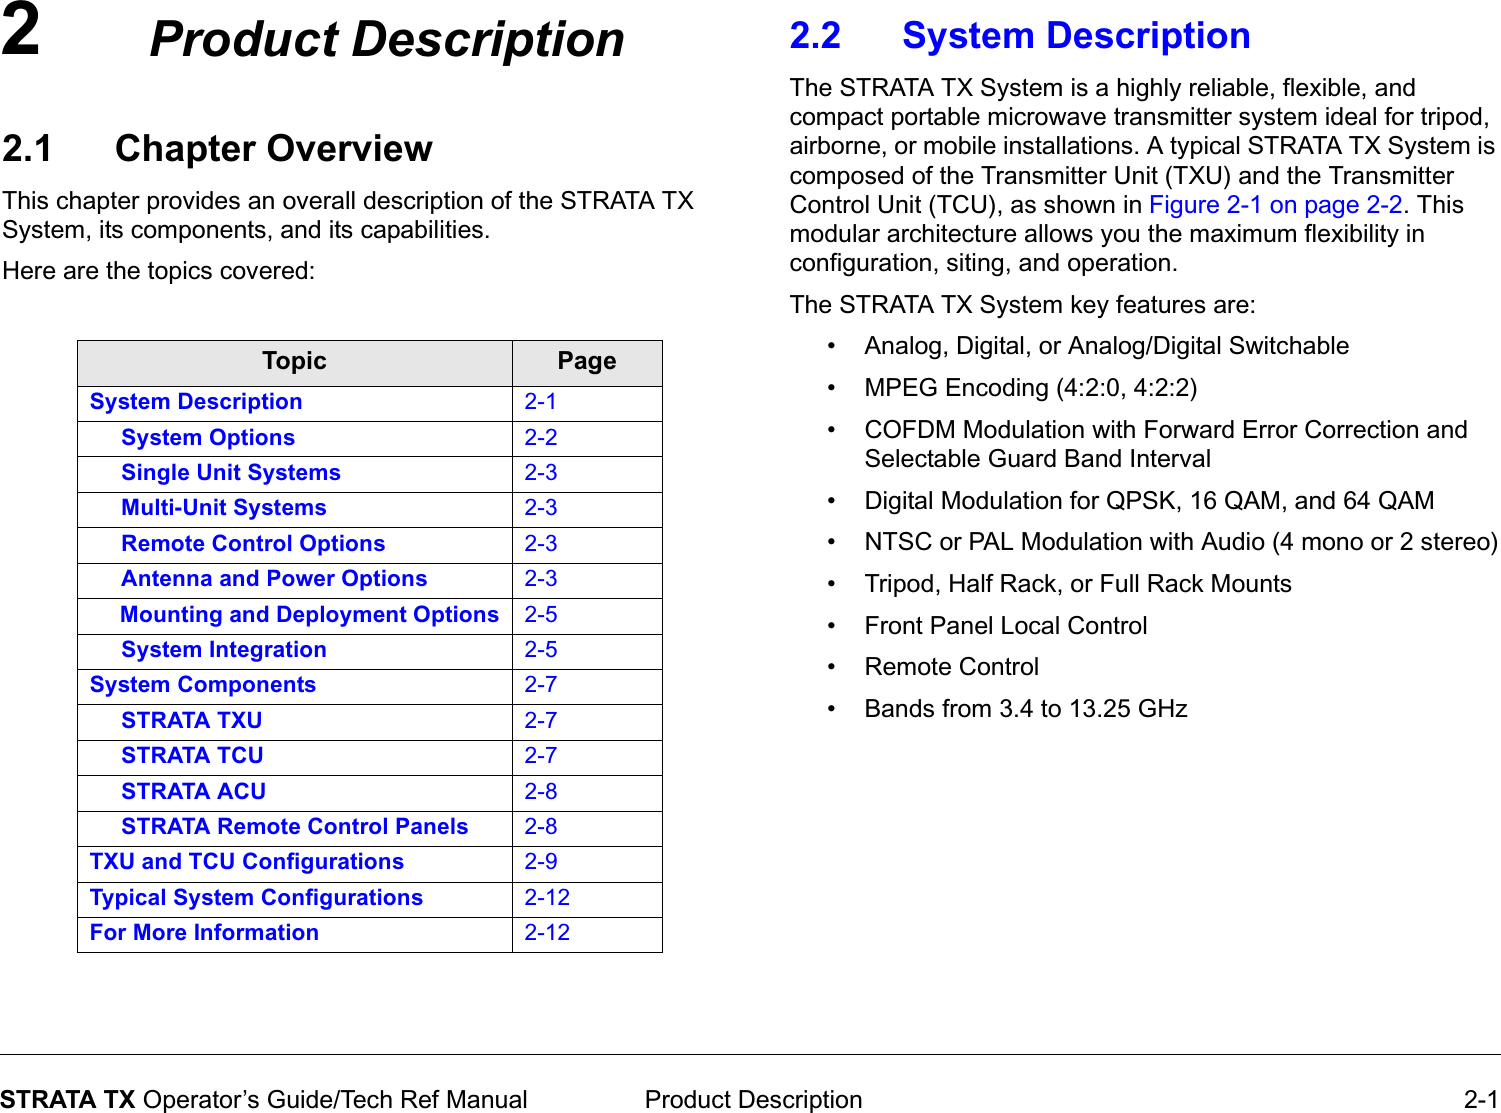 2 Product Description 2-1STRATA TX Operator’s Guide/Tech Ref ManualProduct Description2.1 Chapter OverviewThis chapter provides an overall description of the STRATA TX System, its components, and its capabilities. Here are the topics covered:Topic PageSystem Description 2-1     System Options 2-2     Single Unit Systems 2-3     Multi-Unit Systems 2-3     Remote Control Options 2-3     Antenna and Power Options 2-3     Mounting and Deployment Options 2-5     System Integration 2-5System Components 2-7     STRATA TXU 2-7     STRATA TCU 2-7     STRATA ACU 2-8     STRATA Remote Control Panels 2-8TXU and TCU Configurations 2-9Typical System Configurations 2-12For More Information 2-122.2 System Description The STRATA TX System is a highly reliable, flexible, and compact portable microwave transmitter system ideal for tripod, airborne, or mobile installations. A typical STRATA TX System is composed of the Transmitter Unit (TXU) and the Transmitter Control Unit (TCU), as shown in Figure 2-1 on page 2-2. This modular architecture allows you the maximum flexibility in configuration, siting, and operation.The STRATA TX System key features are:• Analog, Digital, or Analog/Digital Switchable• MPEG Encoding (4:2:0, 4:2:2)• COFDM Modulation with Forward Error Correction and Selectable Guard Band Interval• Digital Modulation for QPSK, 16 QAM, and 64 QAM• NTSC or PAL Modulation with Audio (4 mono or 2 stereo)• Tripod, Half Rack, or Full Rack Mounts• Front Panel Local Control• Remote Control• Bands from 3.4 to 13.25 GHz